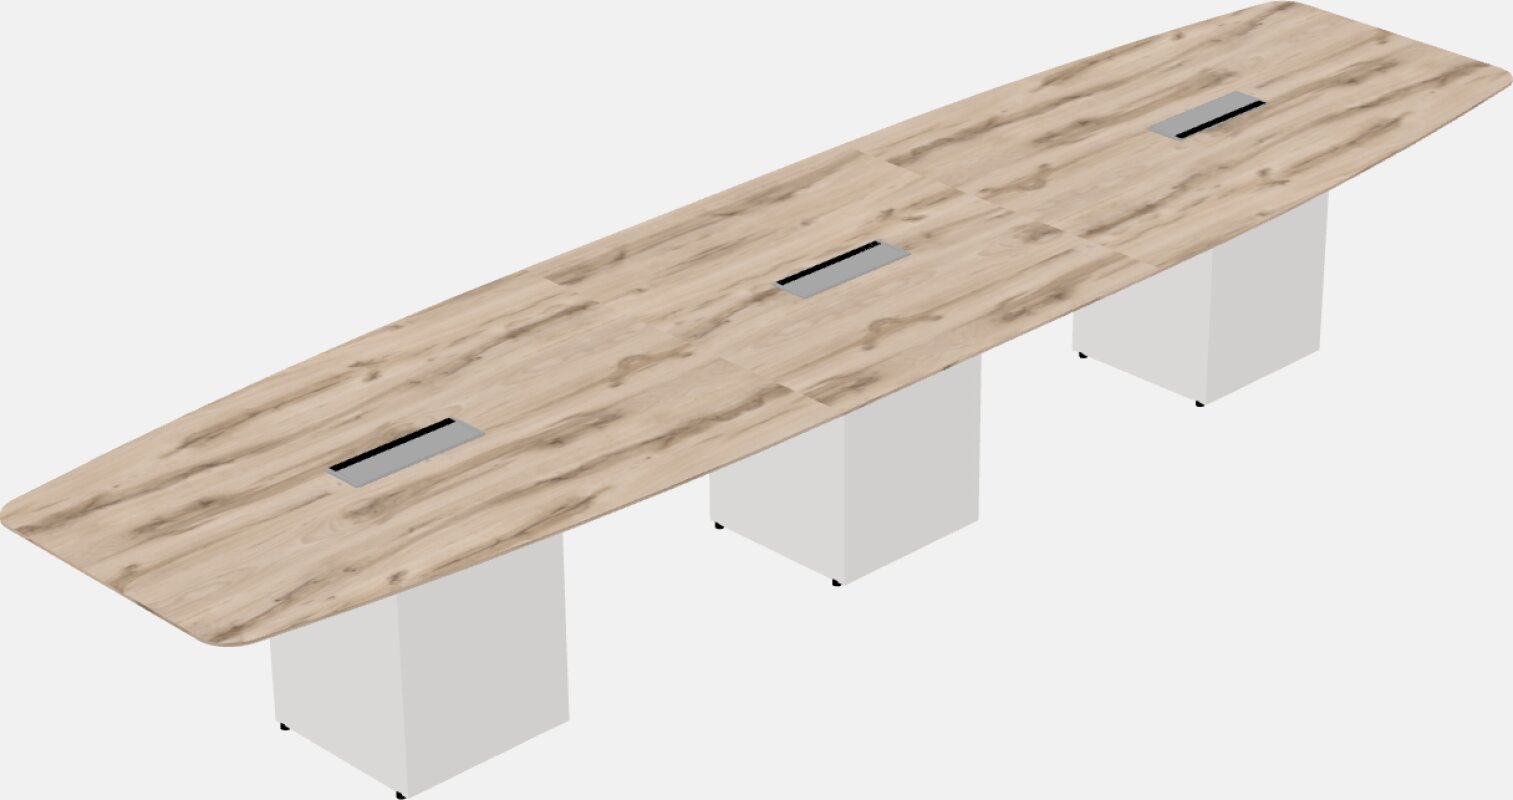 Boat-shaped Meeting Table